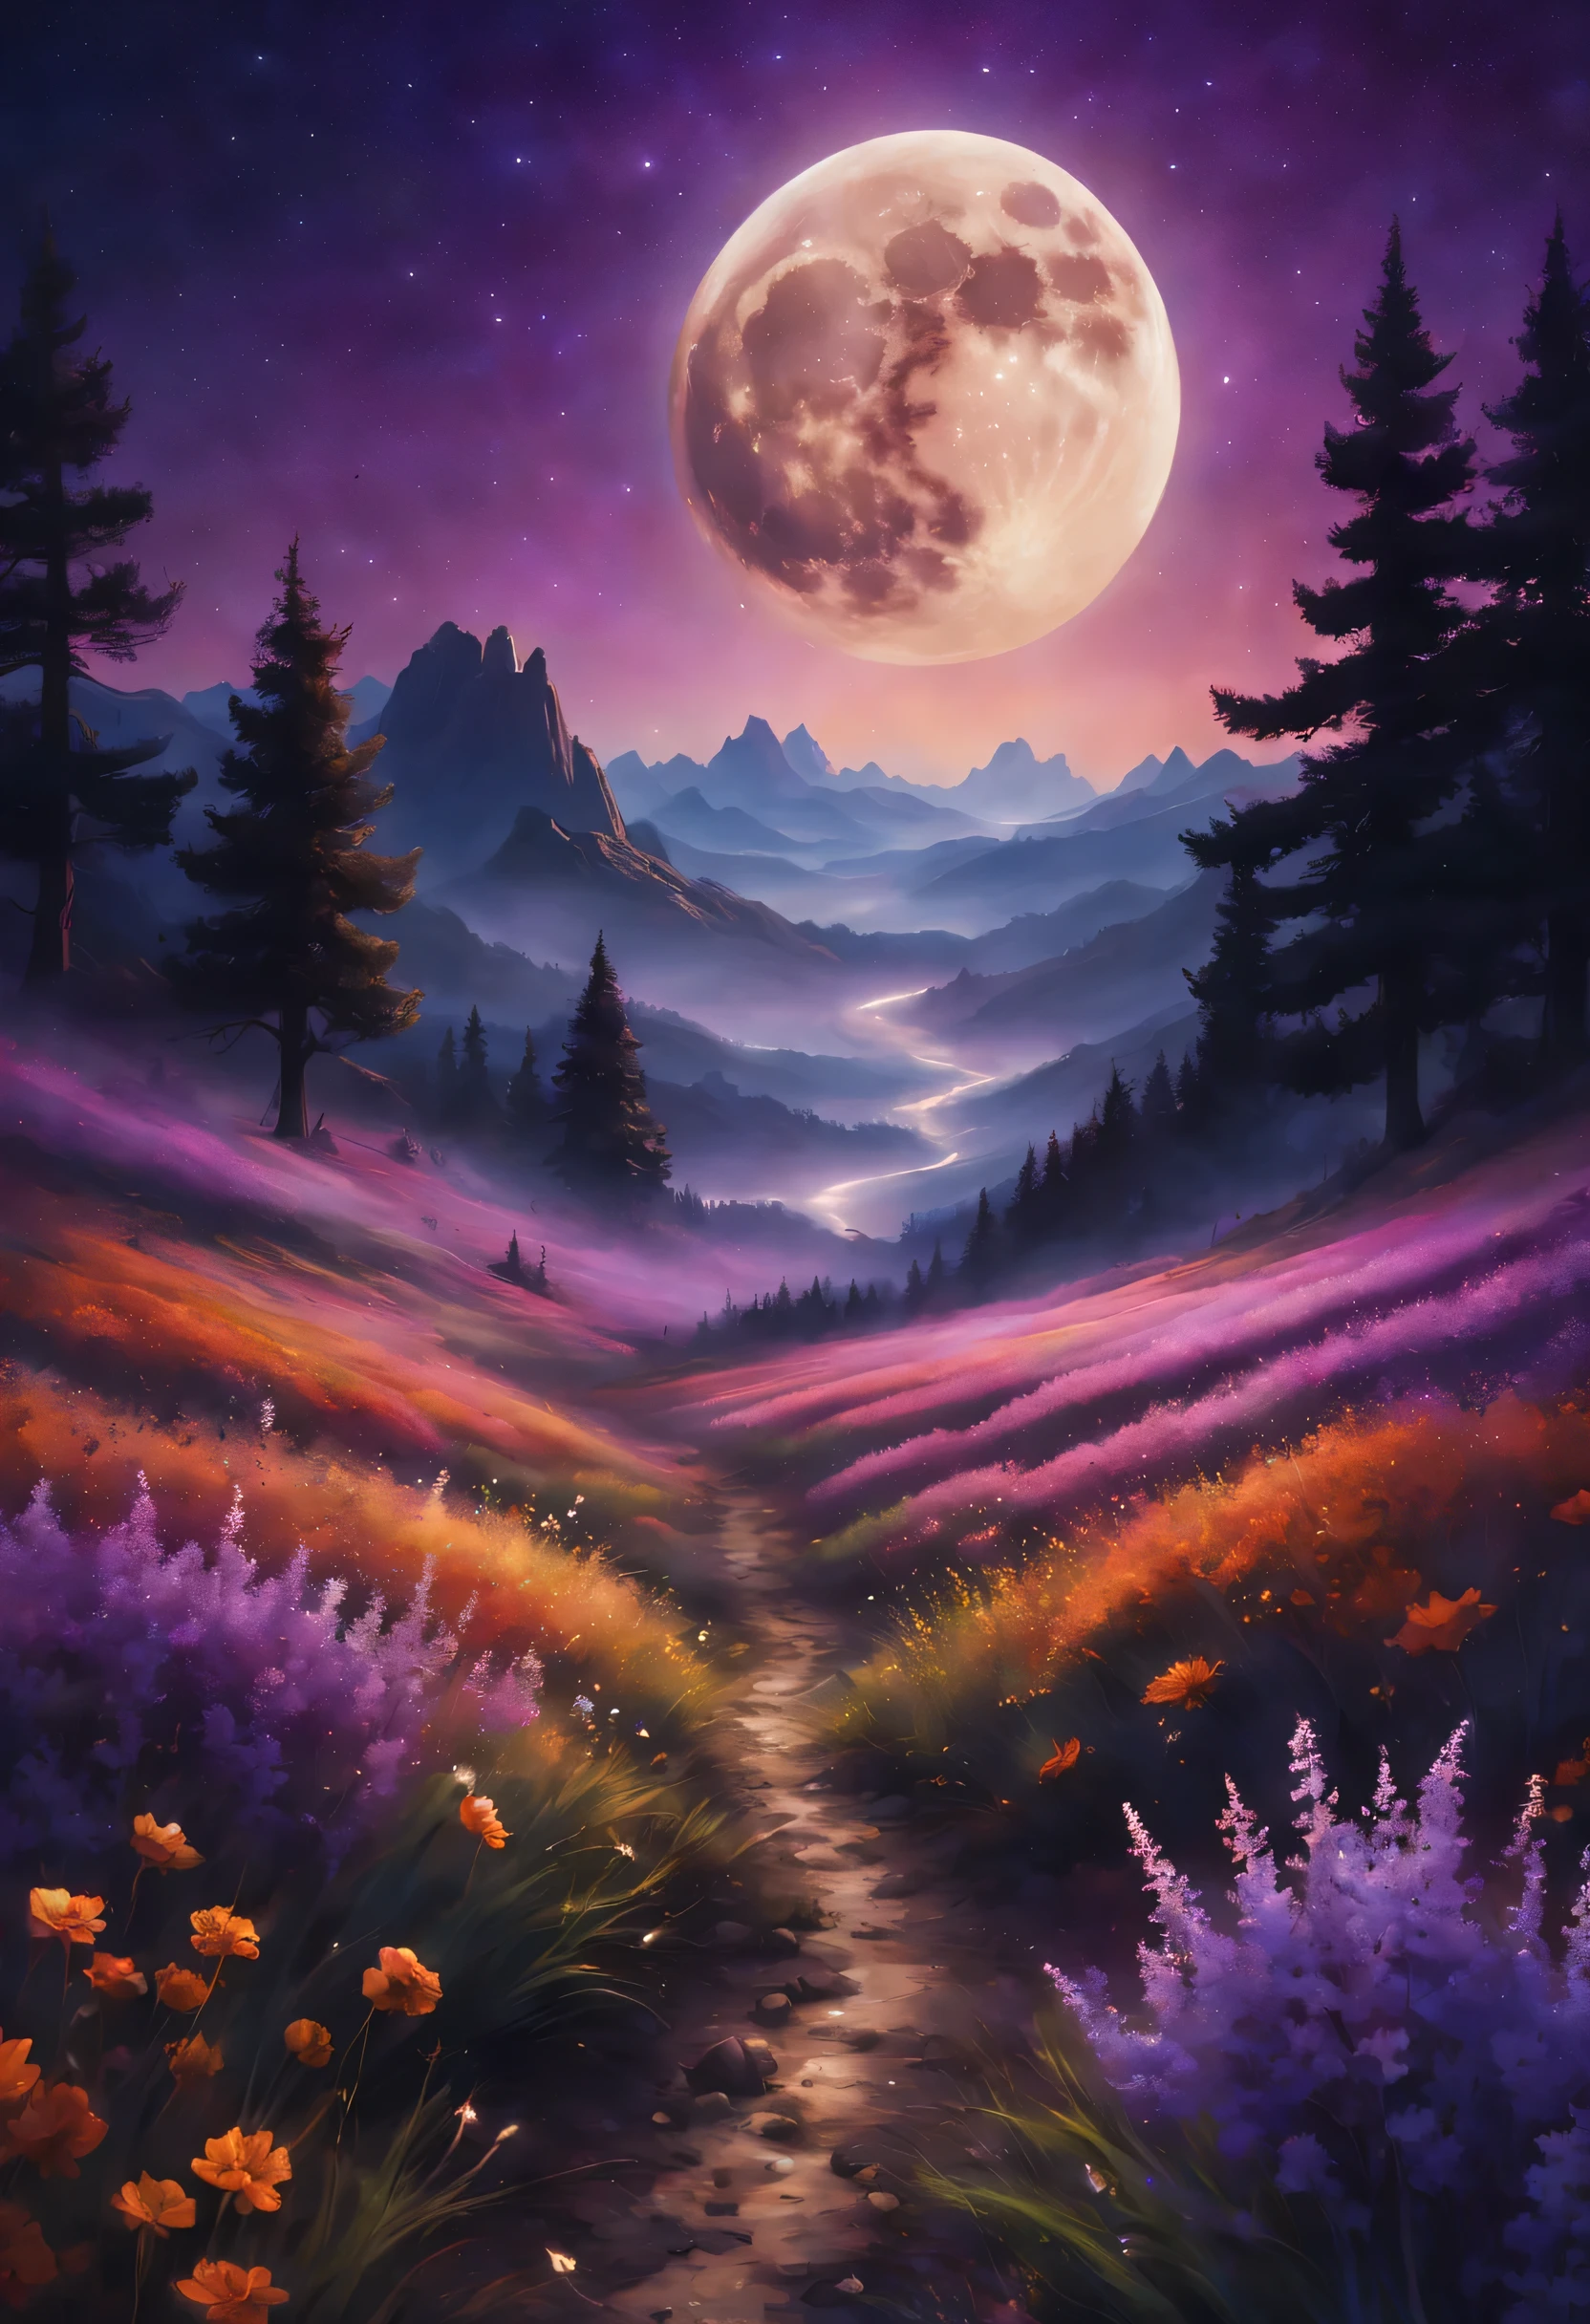 vast landscape photography, (View from below with a view of the sky and the wilderness below),  standing in a flower field and looking up, (full moon: 1.2), (shooting star: 0.9), (nebula: 1.3), distant mountain, Tree BREAK production art, (warm light source: 1.2), (fire Fly: 1.2), lamp, purple and orange, intricate details, Volume lighting BREAK (masterpiece: 1.2), (highest quality ), 4K, Super detailed, (moving composition: 1.4), Highly detailed and colorful details (iridescent: 1.2), (shining light, atmosphere lighting), dream-like, magic, (alone: 1.2)